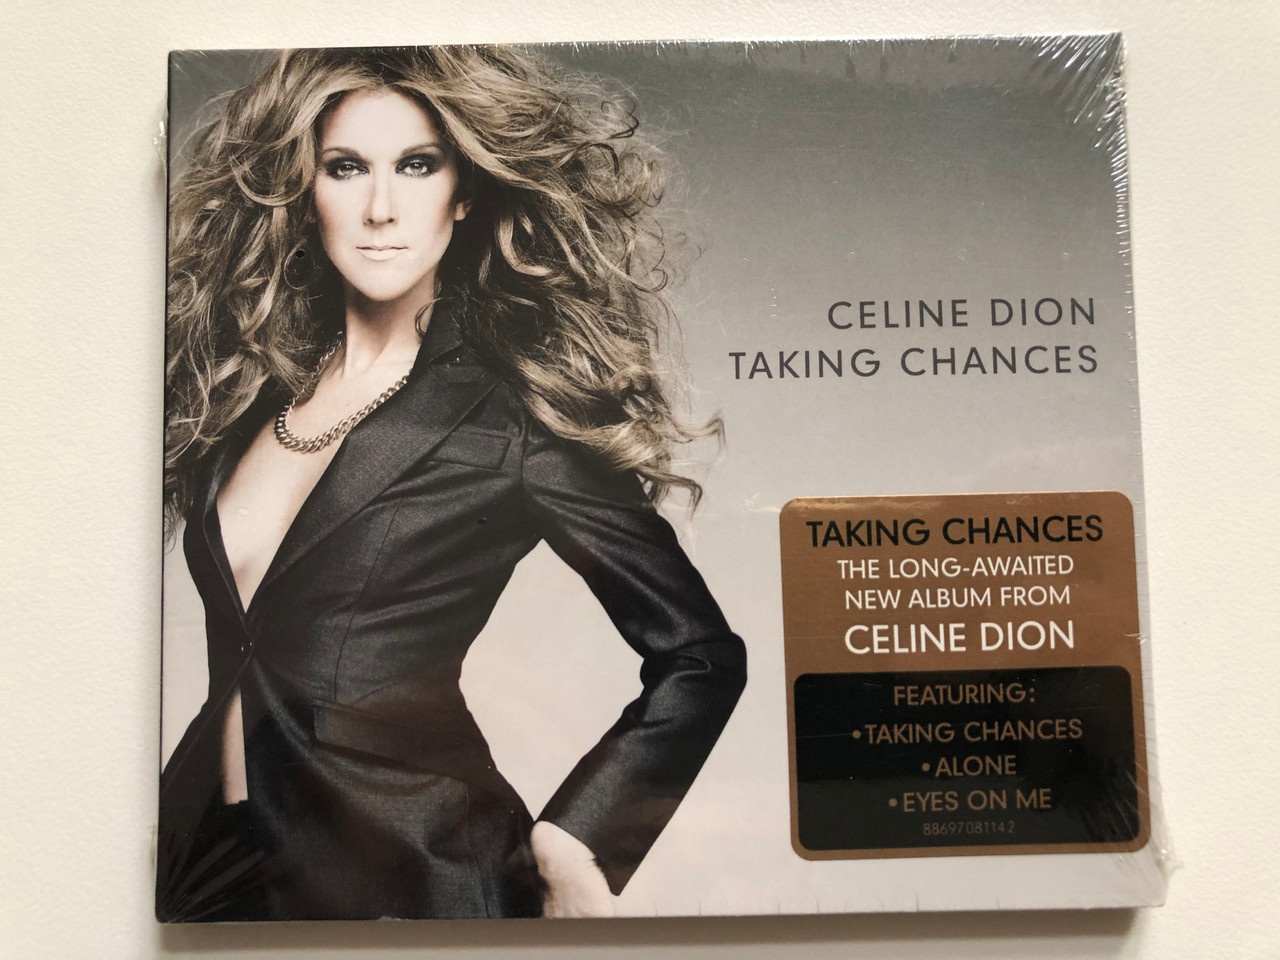 Celine Dion – Taking Chances / 'Taking Chances' The Long-Awaited New Album Celine Dion, Featuring: 'Taking Chances', 'Alone', On Me' / Columbia 2007 / 88697081142 - bibleinmylanguage